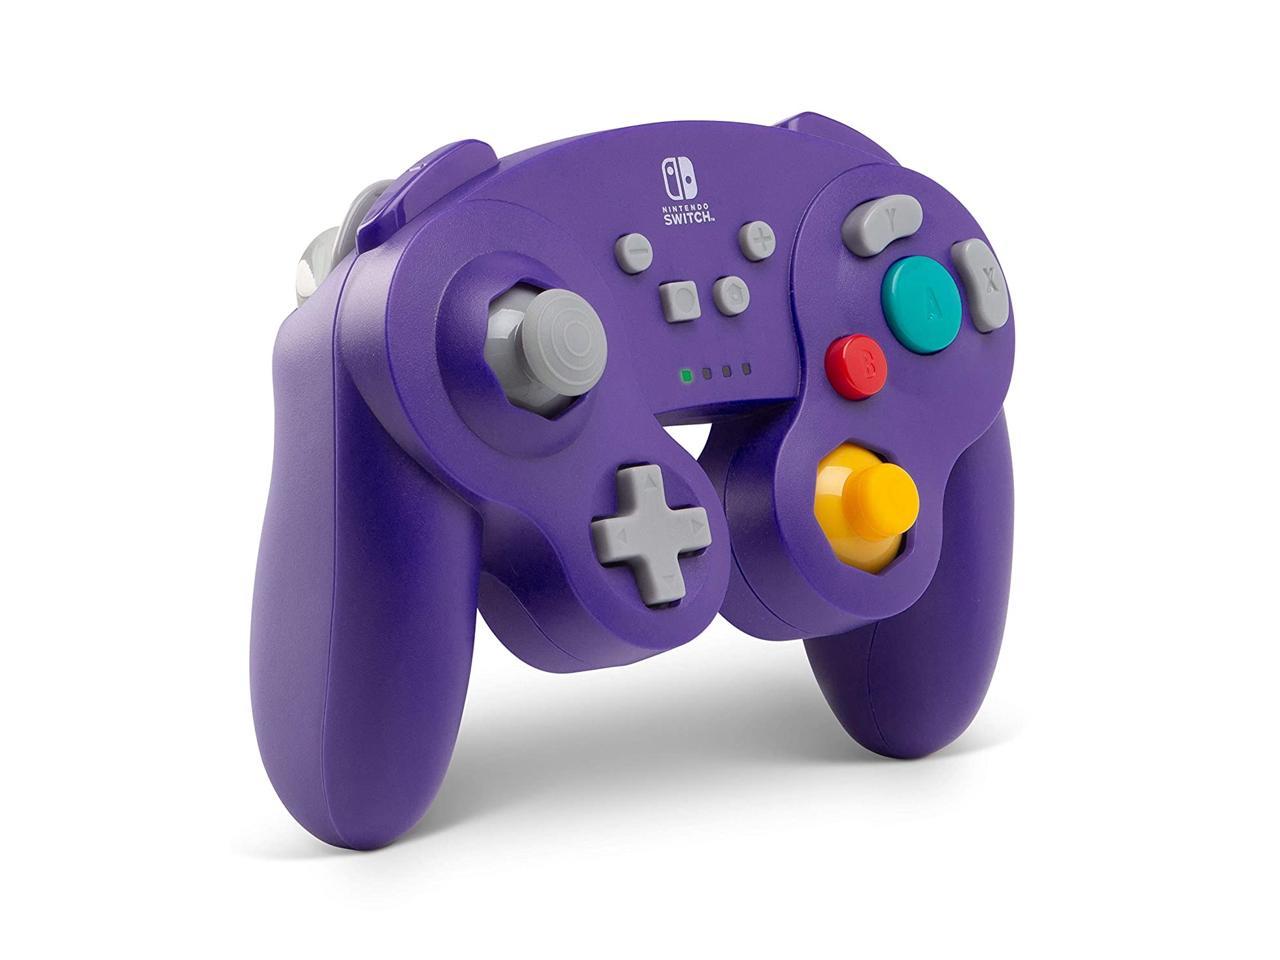 power a gamecube controller 4 pack